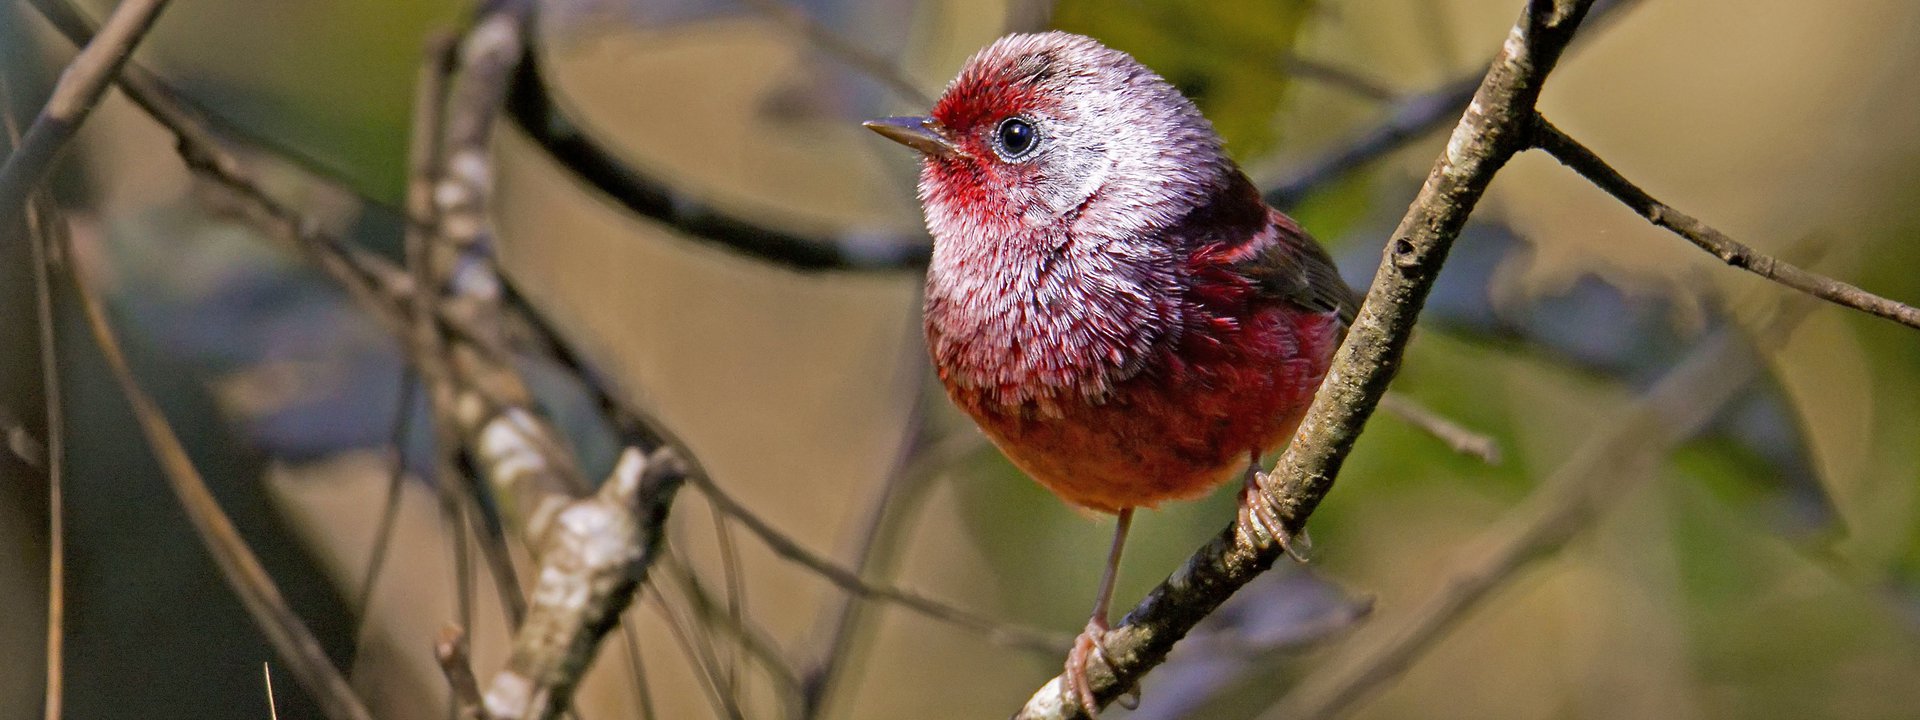 https://limosa-holidays-co-uk.s3.amazonaws.com/images/Pink-headed_Warbler_Benedicto_Gri.2e16d0ba.fill-1920x720_fh3PEBH.jpg